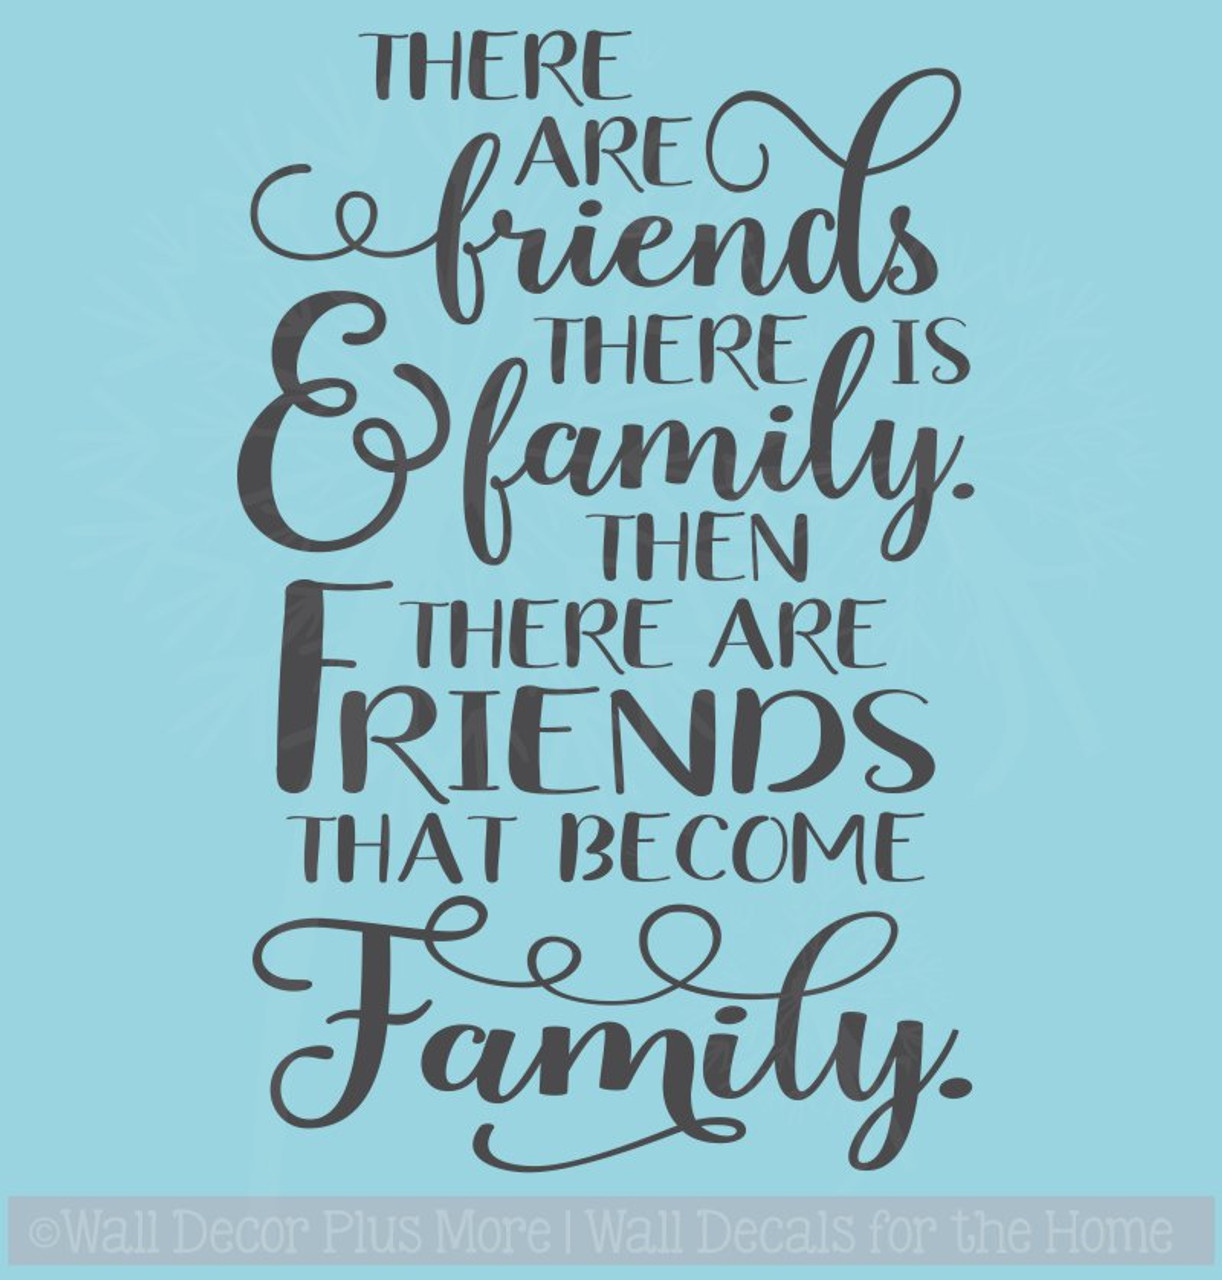 Wall Decals Vinyl Lettering for Home Decor Friends Become Family Quotes